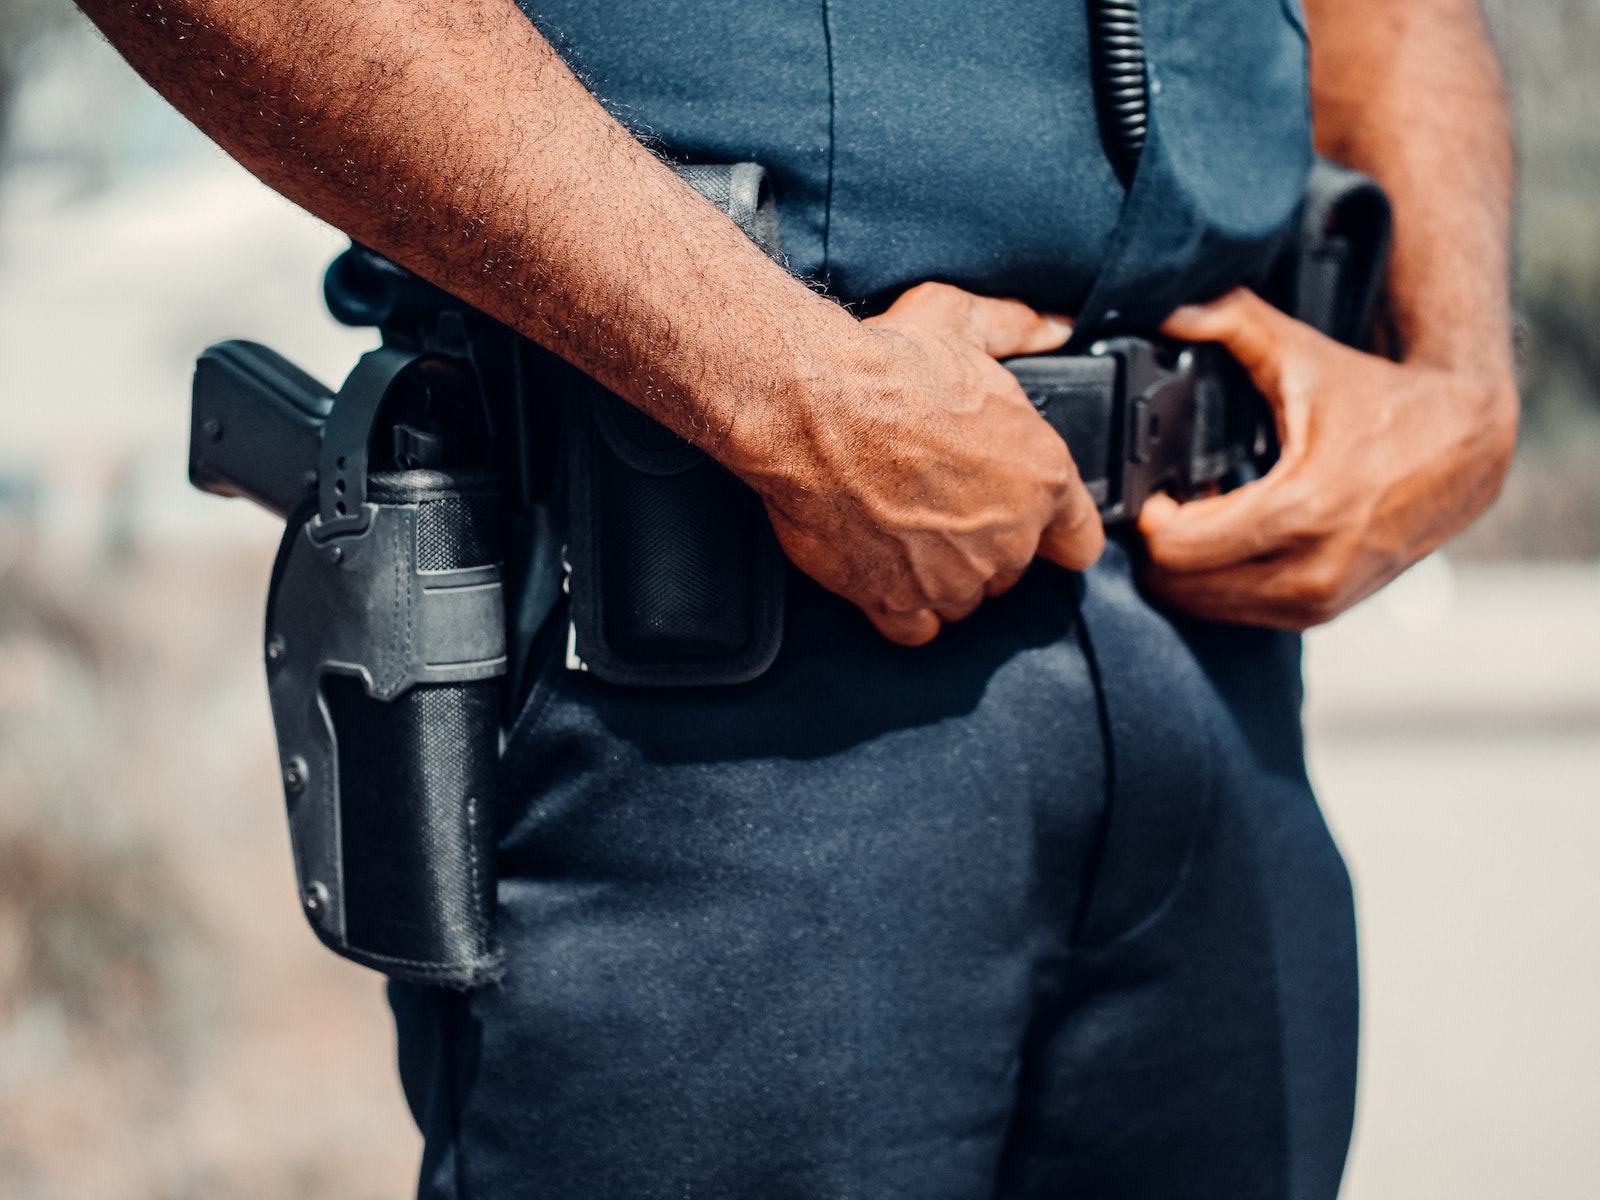 Holsters Police Officer in Blue Uniform with Handgun